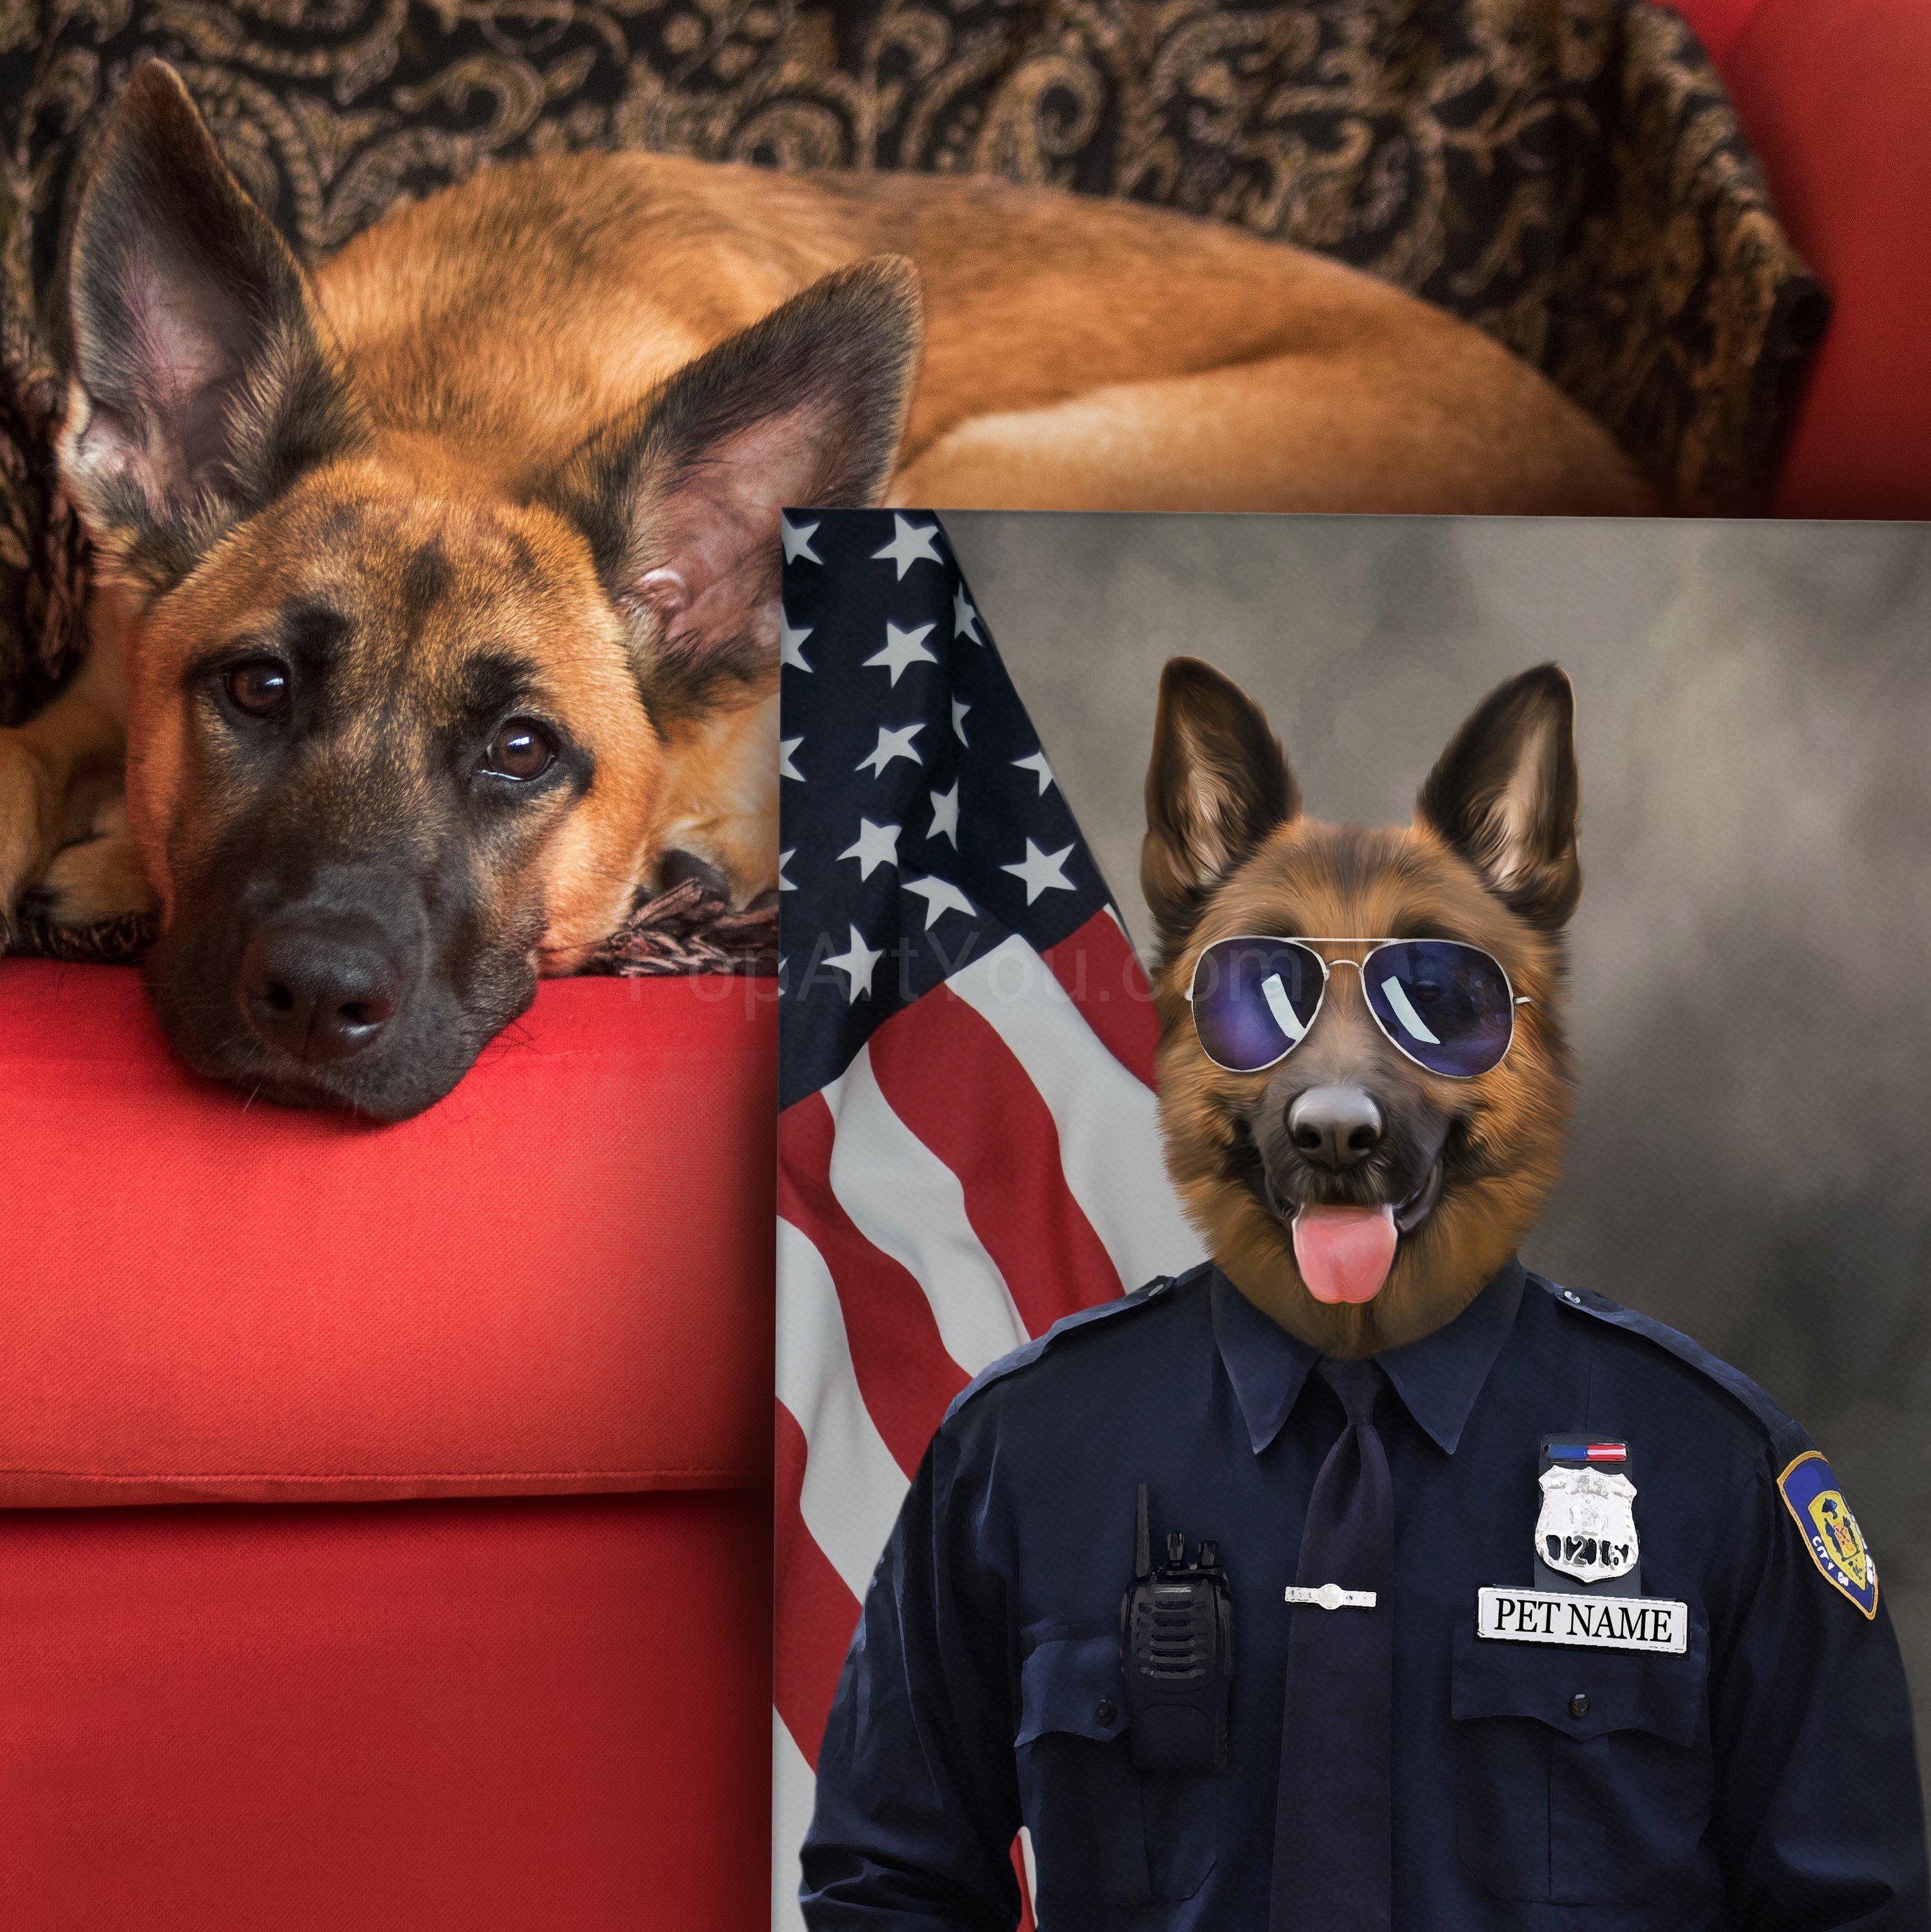 The dog lies near a portrait of himself with a human body dressed in police clothes